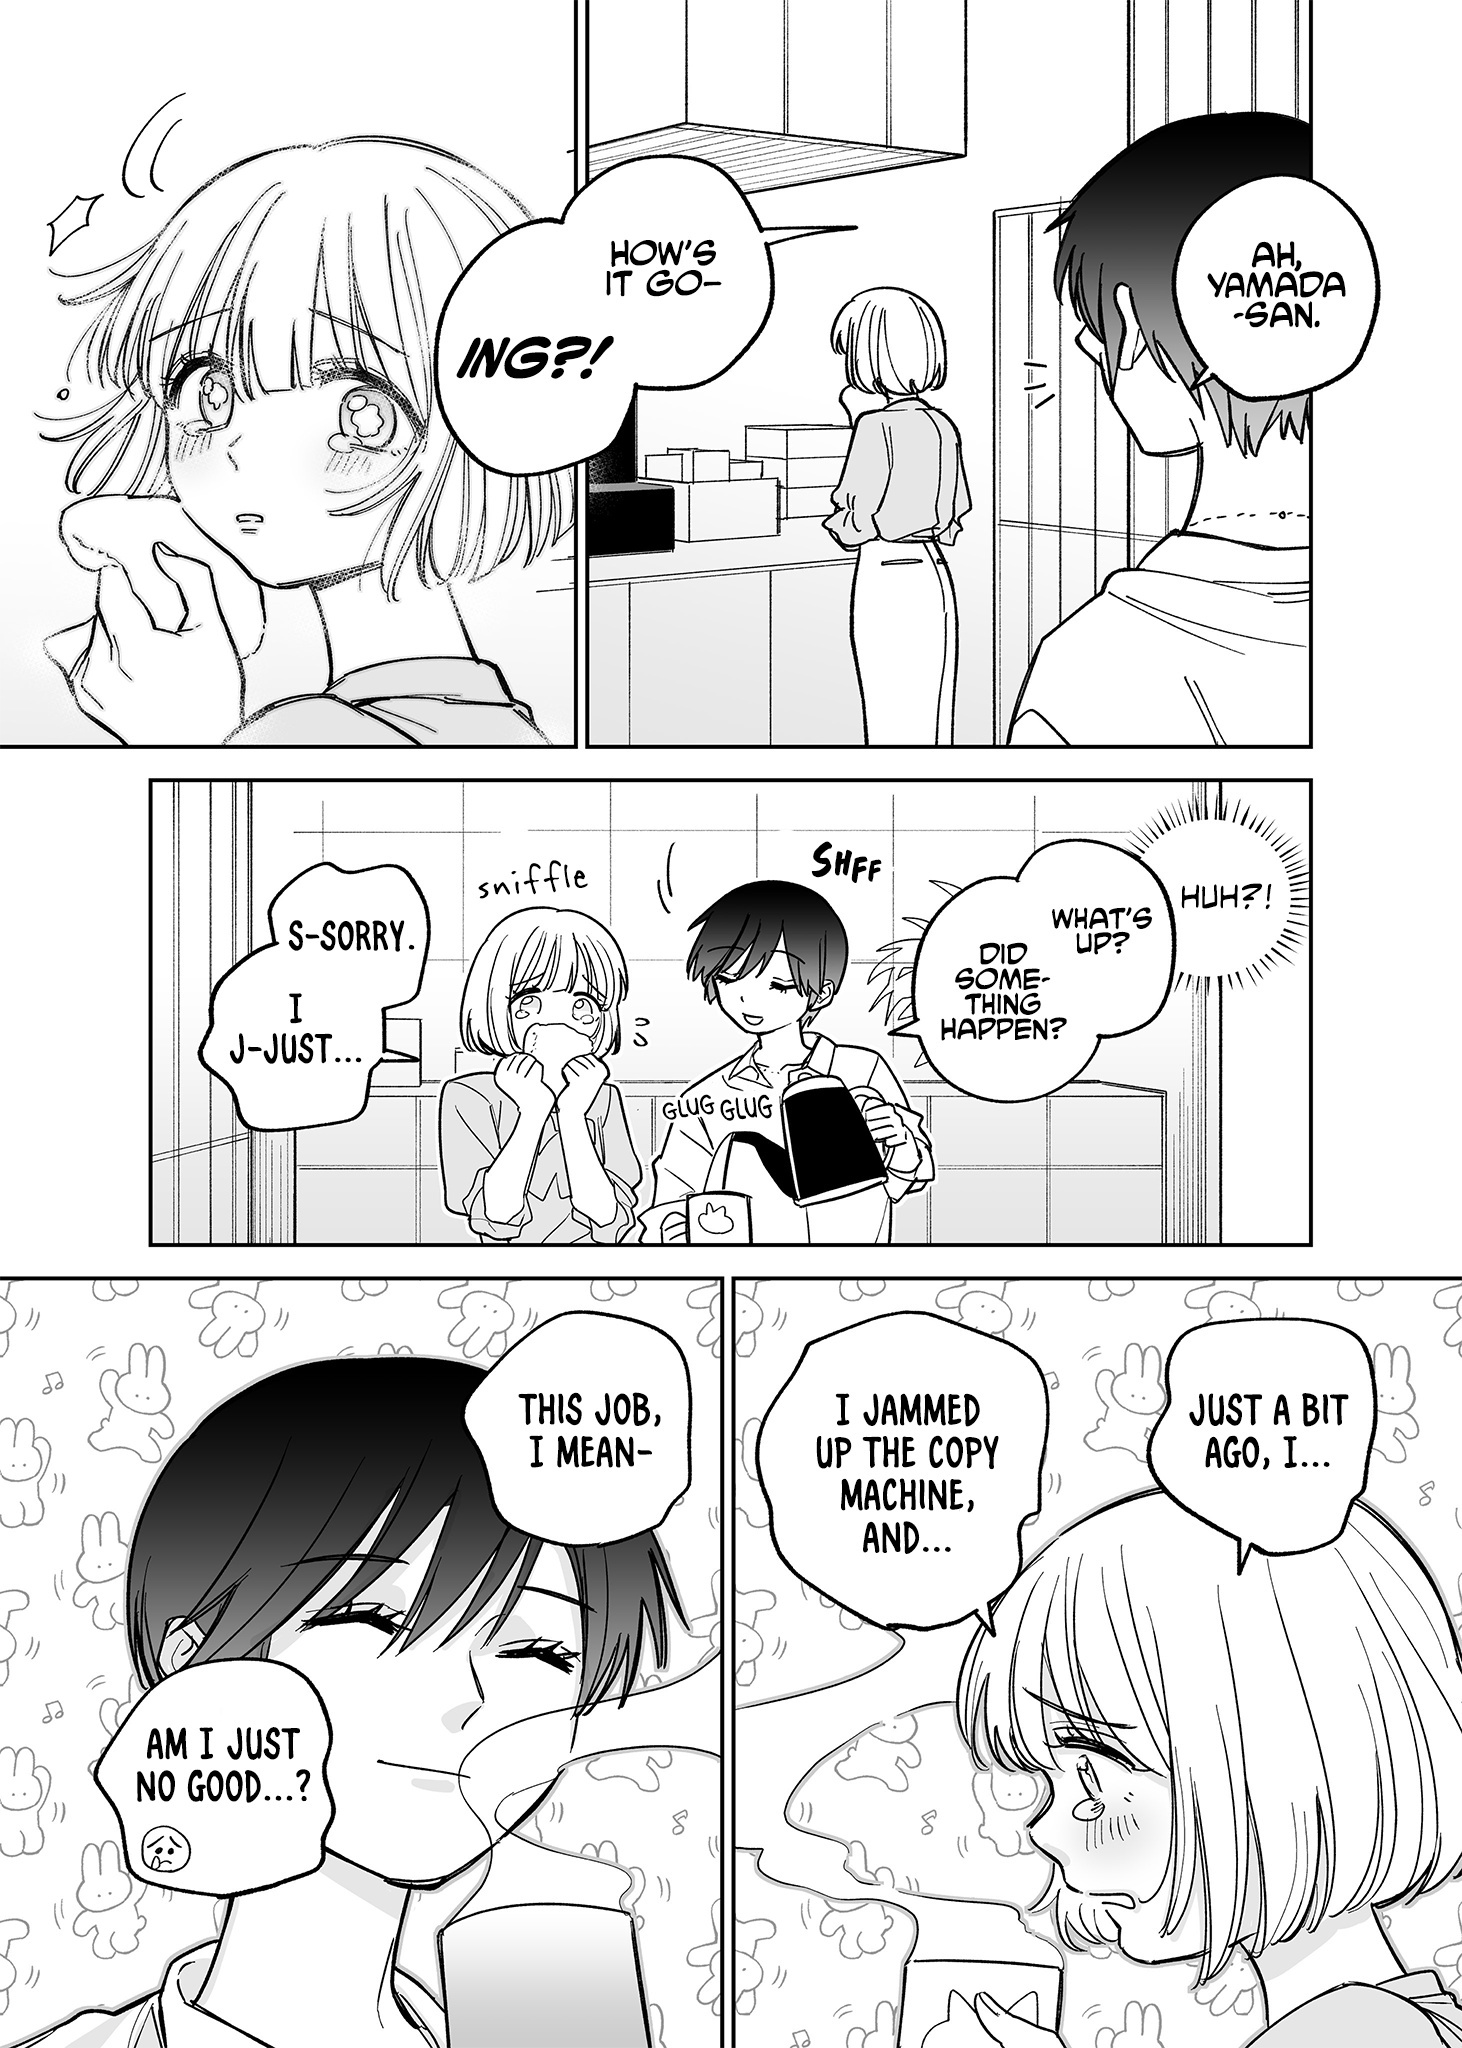 An Ol At Her Limit Needs Help Tidying Up - chapter 1 - #3